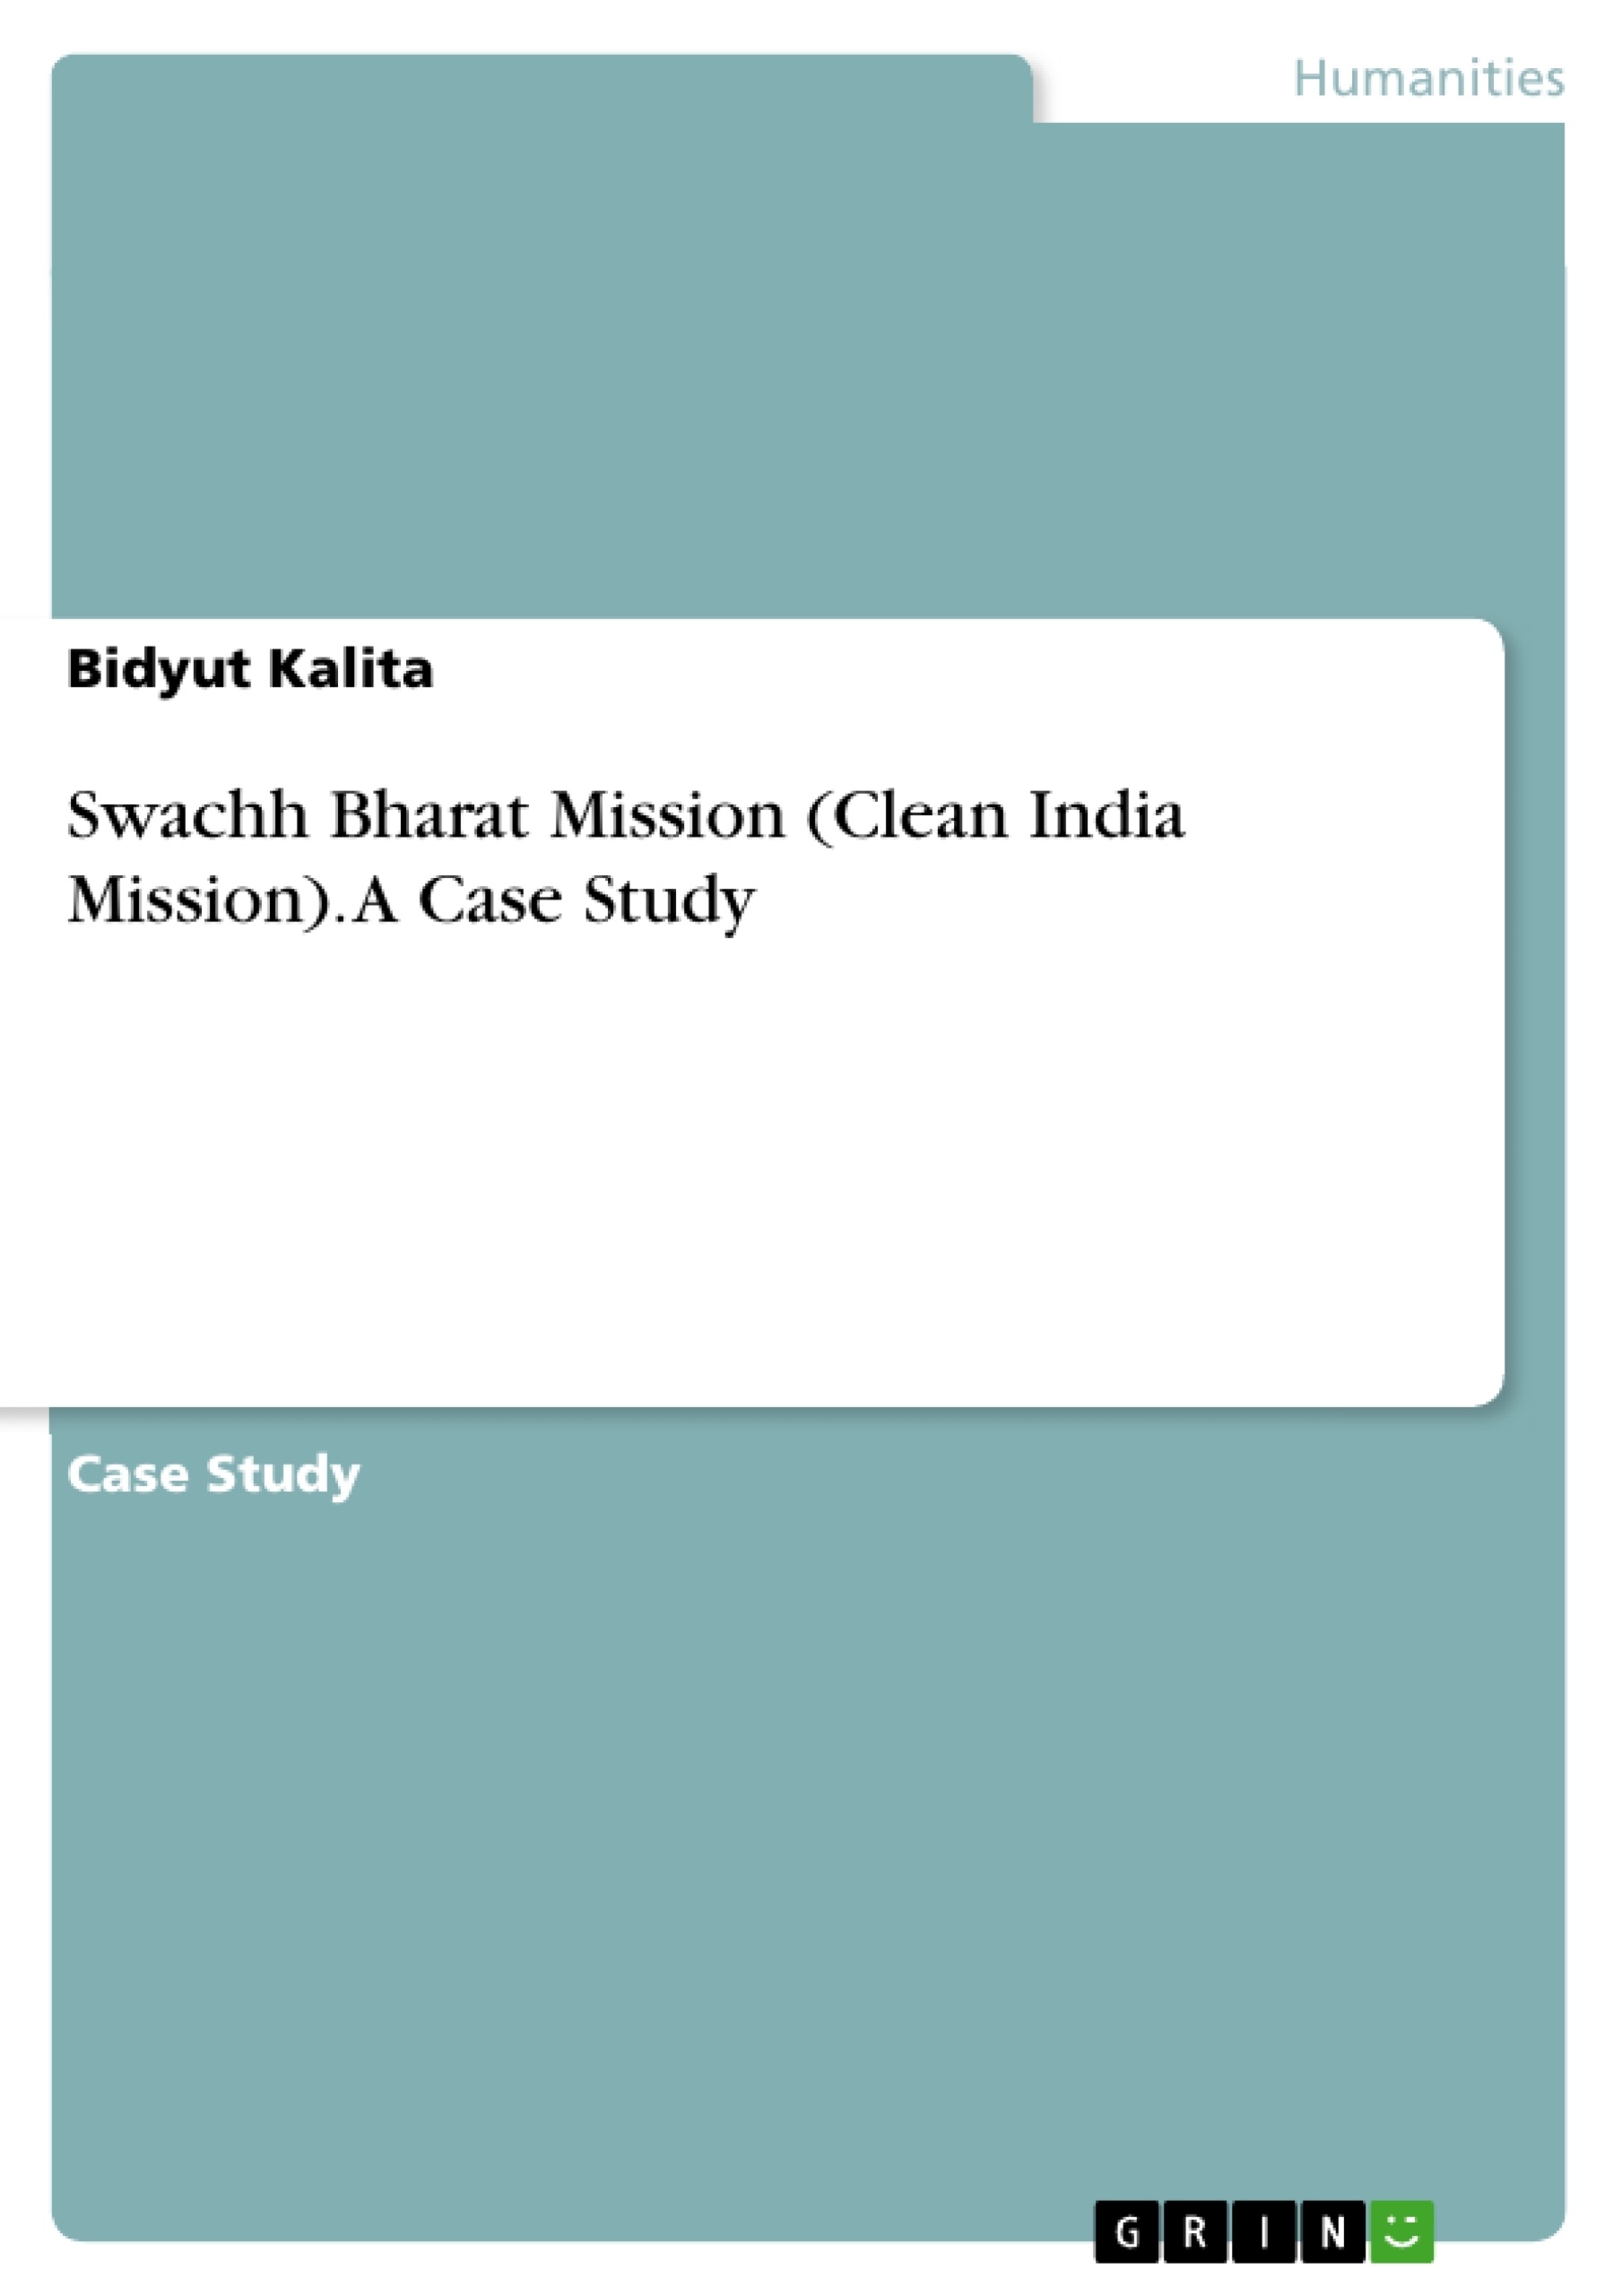 Title: Swachh Bharat Mission (Clean India Mission). A Case Study